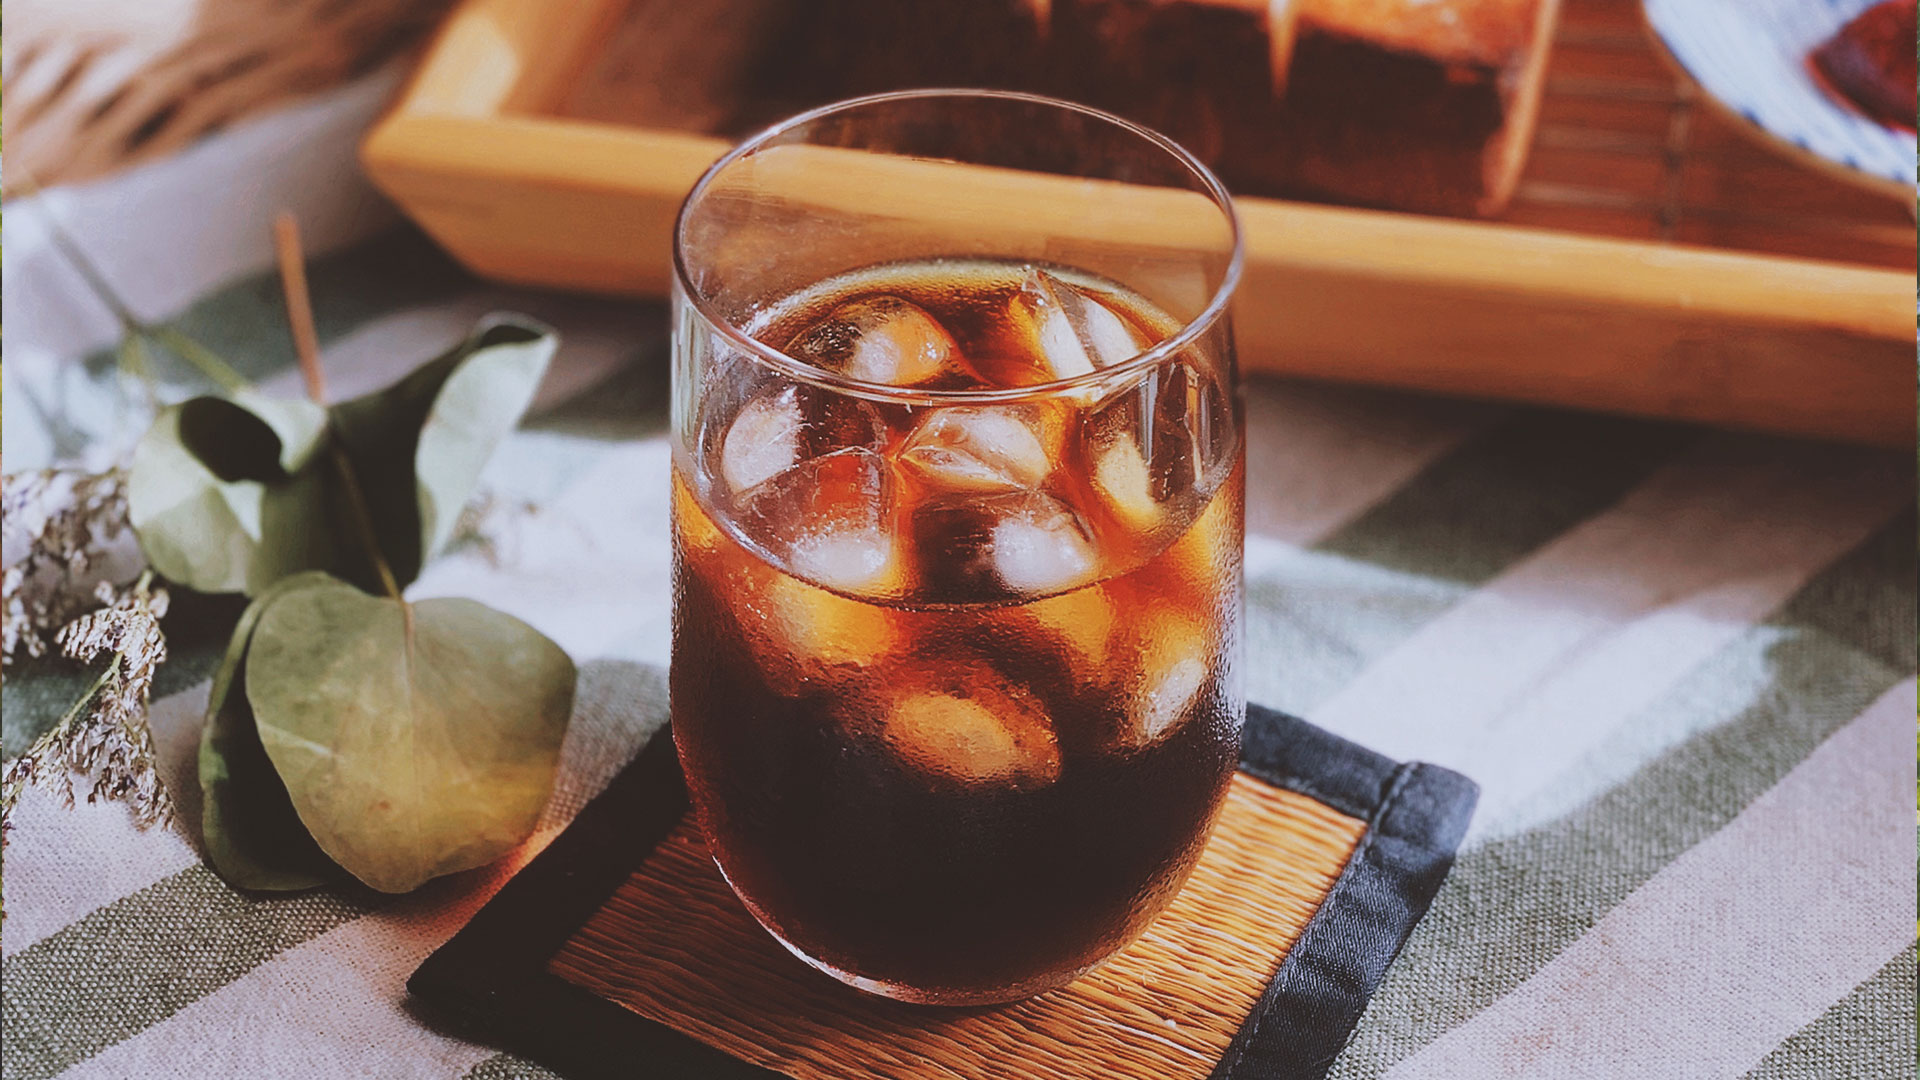 Here's how to make your own cold brew coffee at home